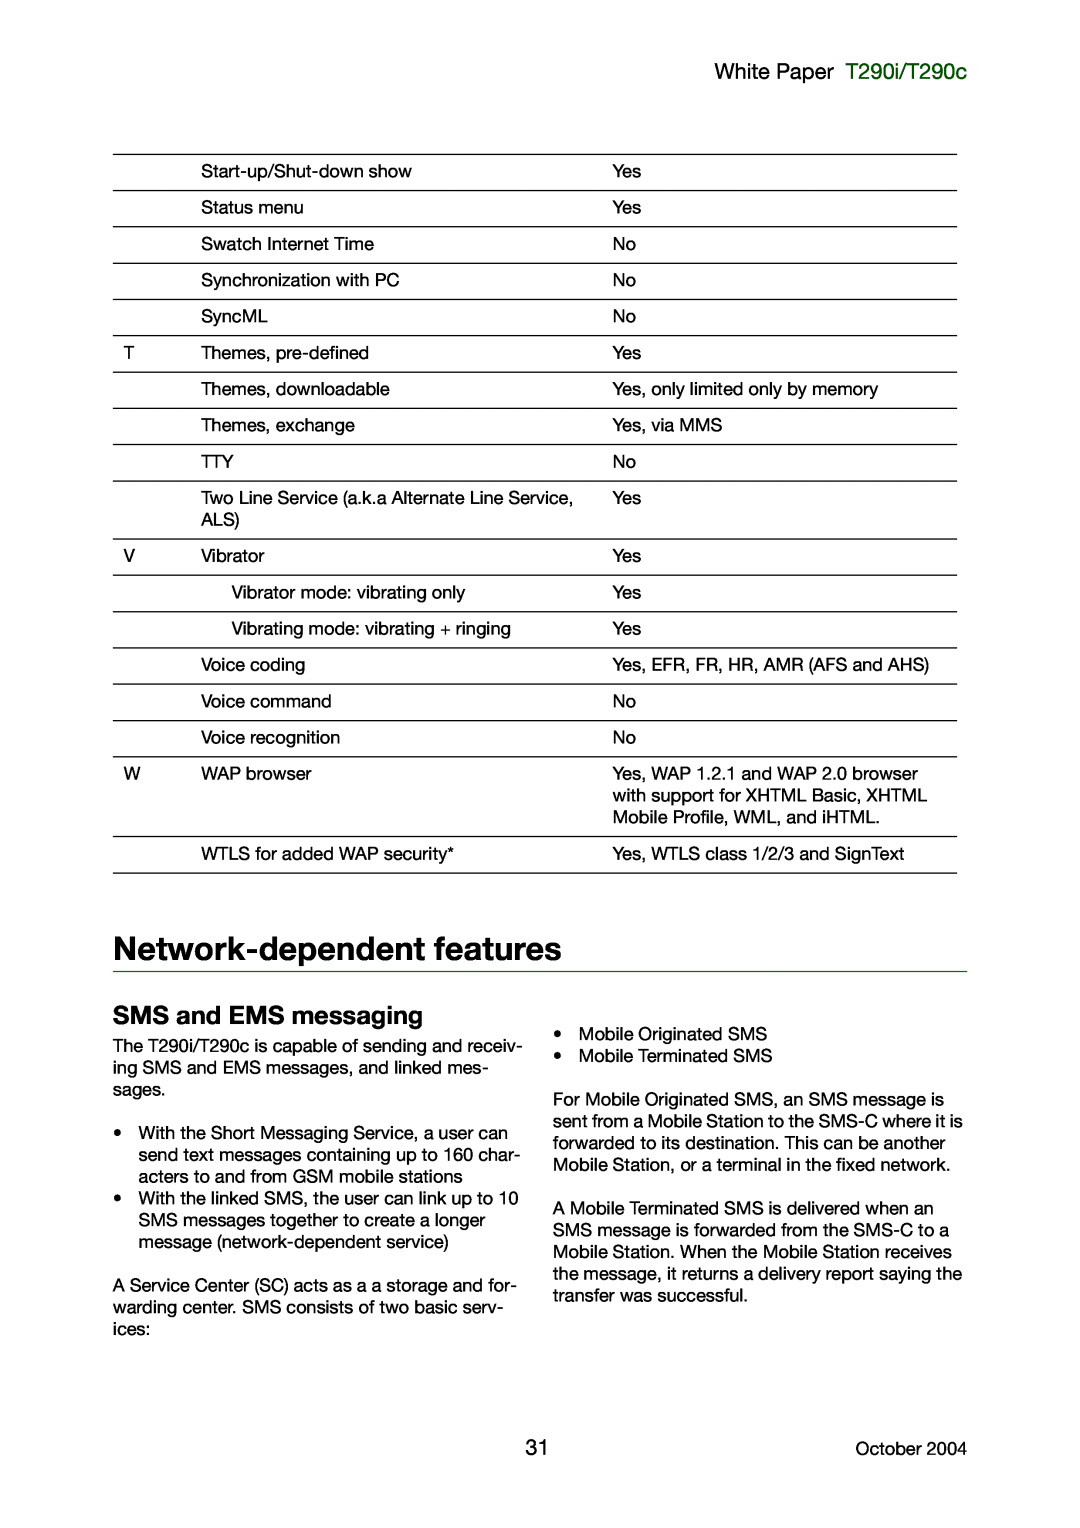 Sony Ericsson manual Network-dependent features, SMS and EMS messaging, White Paper T290i/T290c 